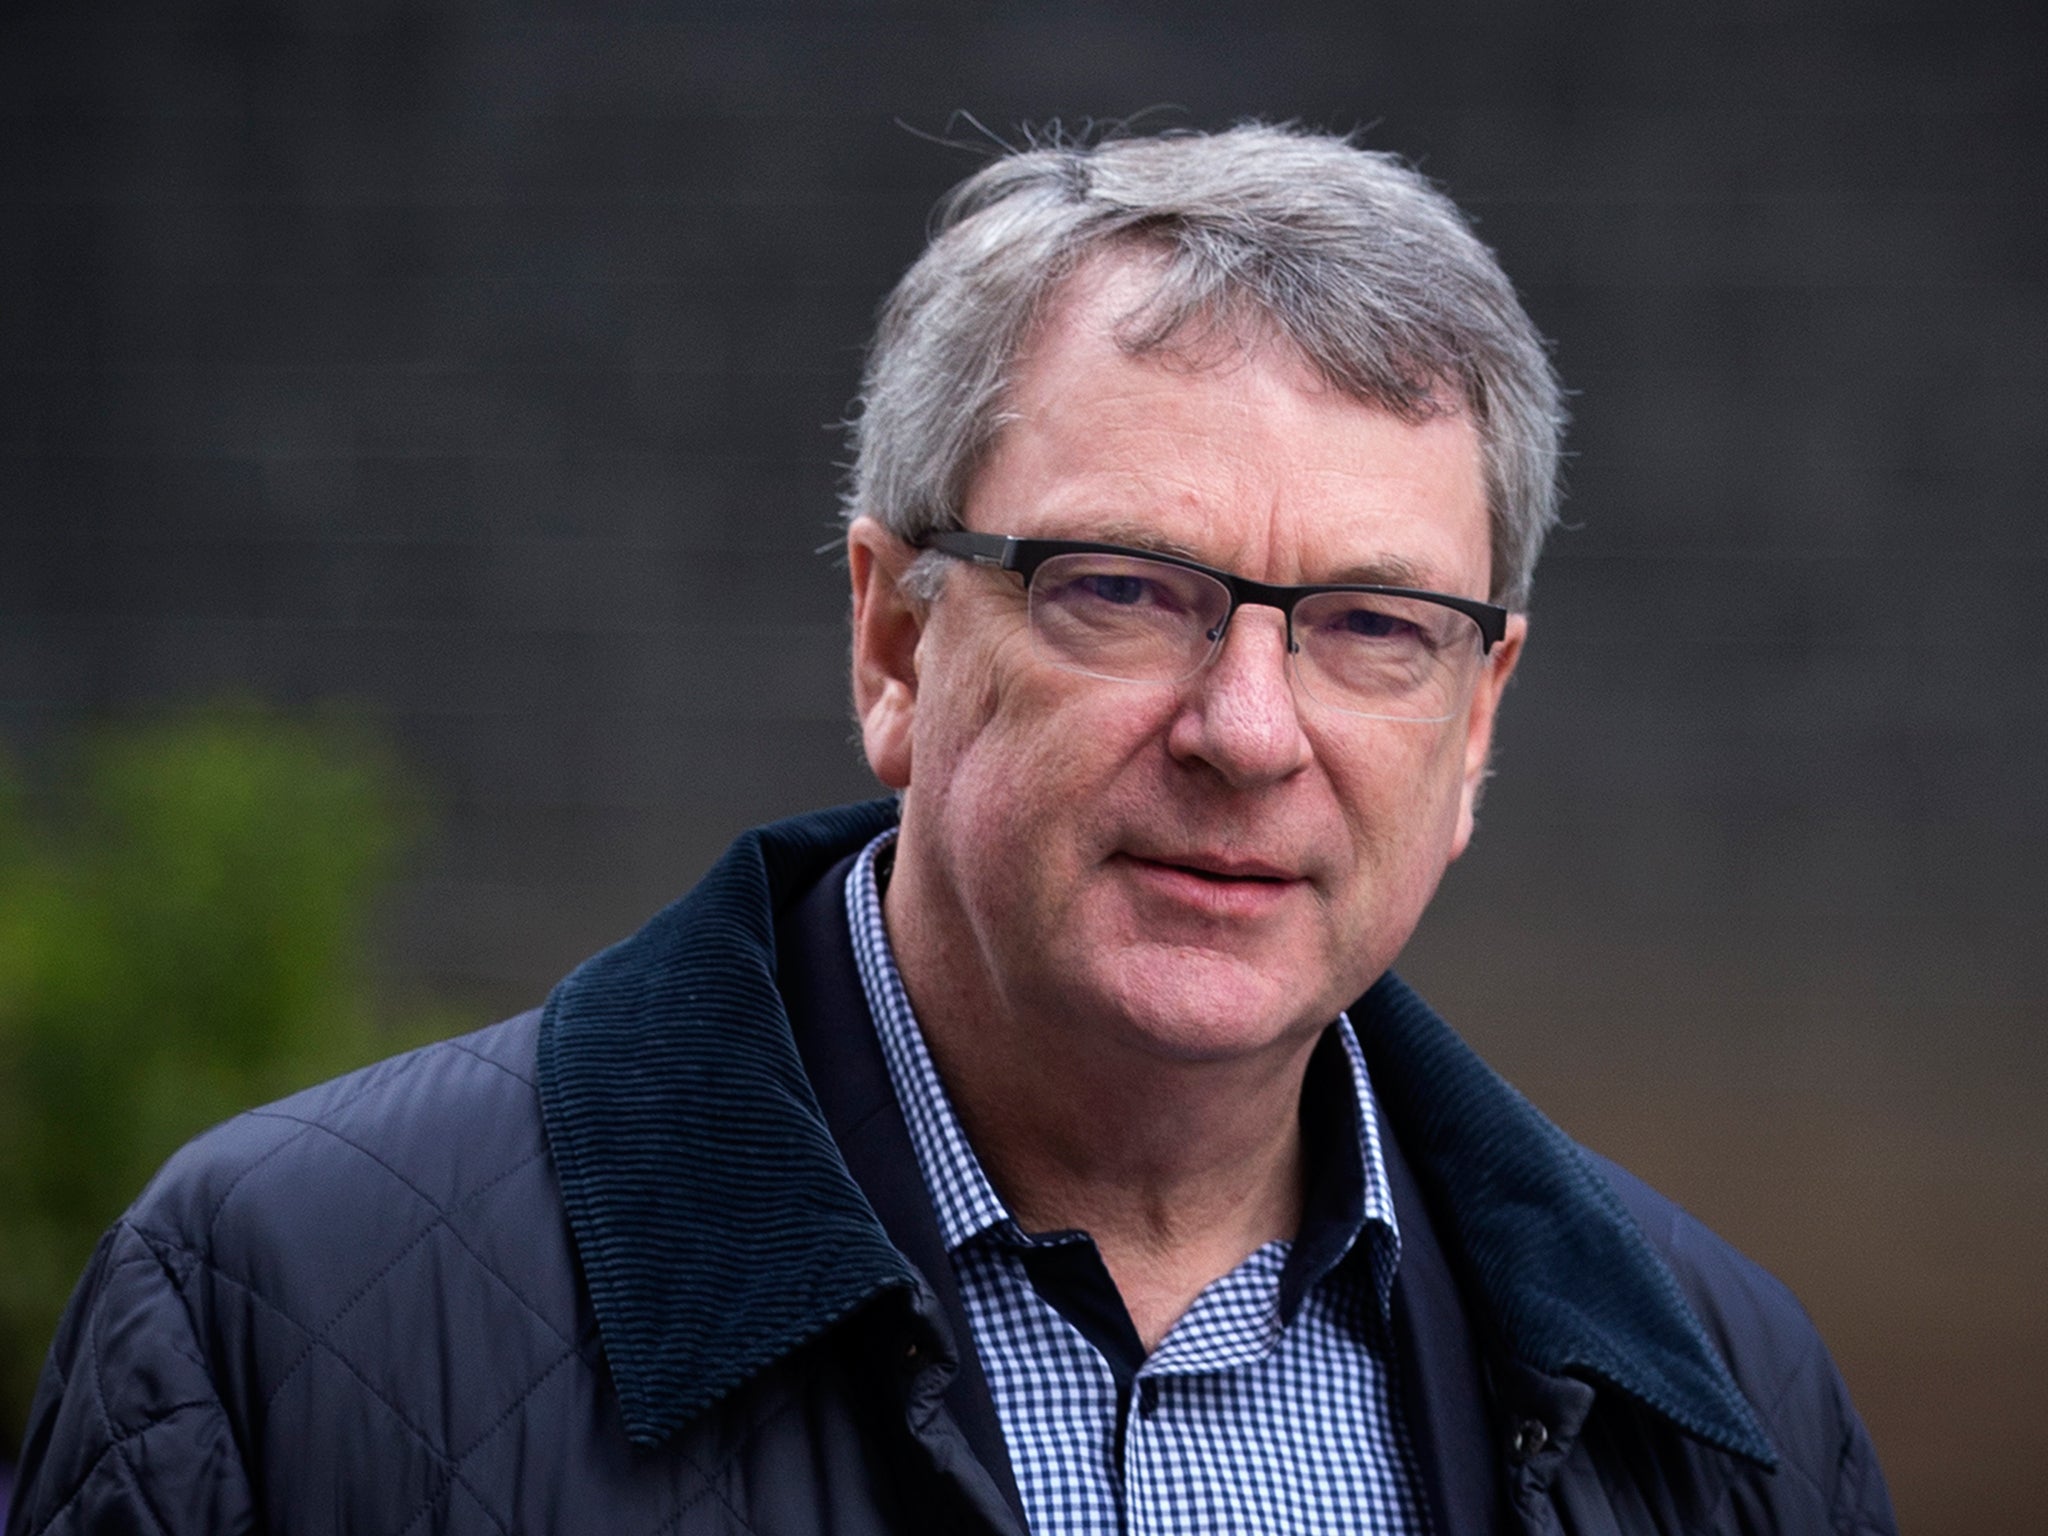 Lynton Crosby was brought in by the Conservatives in 2005 to manage their unsuccessful general election campaign